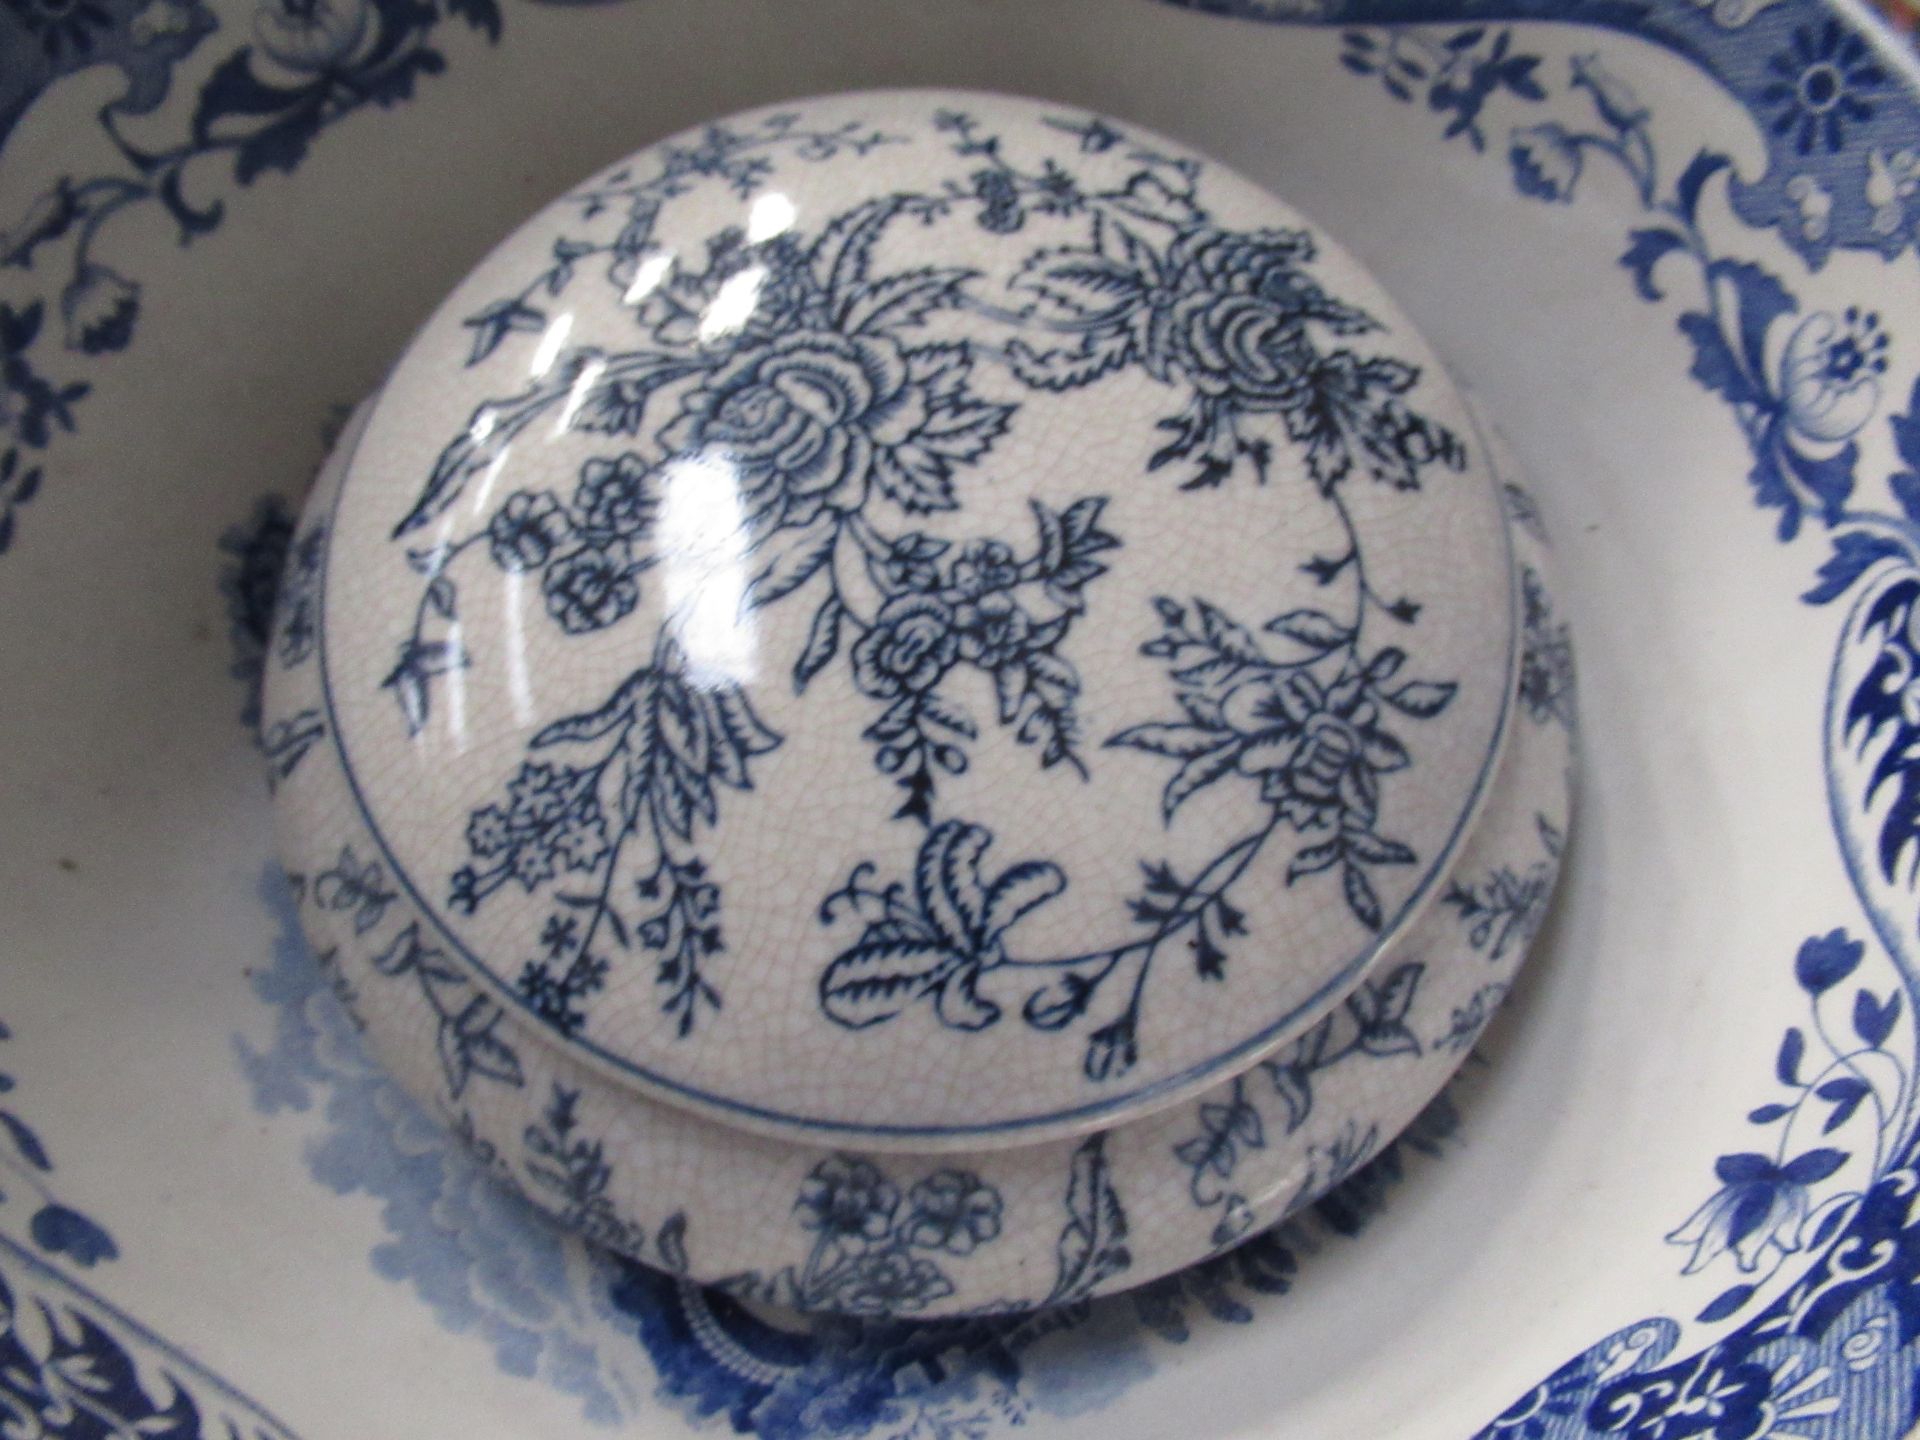 Ceramics including Serving Tray and Dishes, Vases, Bowls etc - Image 6 of 7